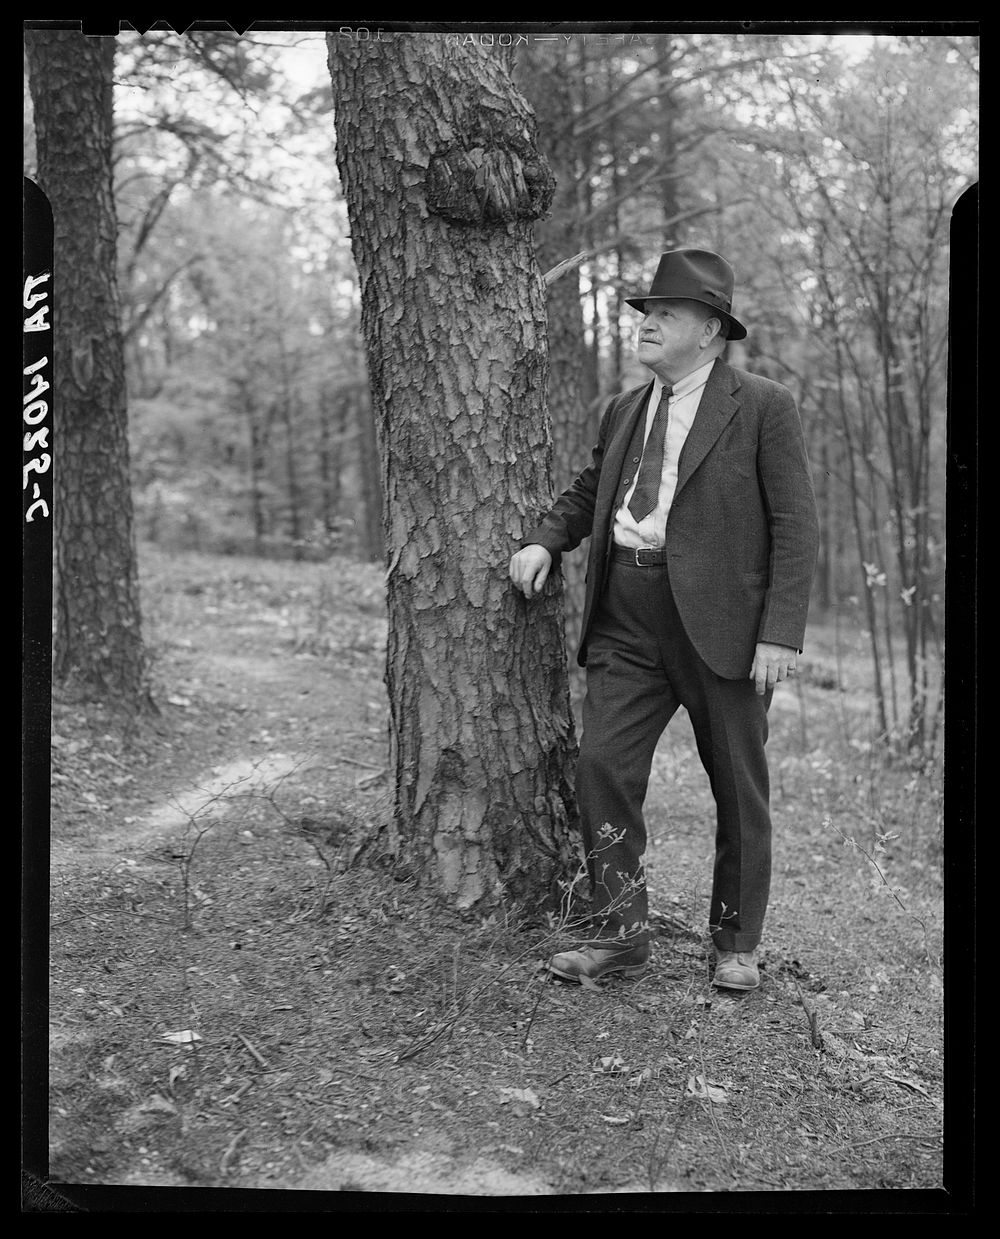 Mr. McGregor, groundskeeper at Berwyn, Maryland. Sourced from the Library of Congress.